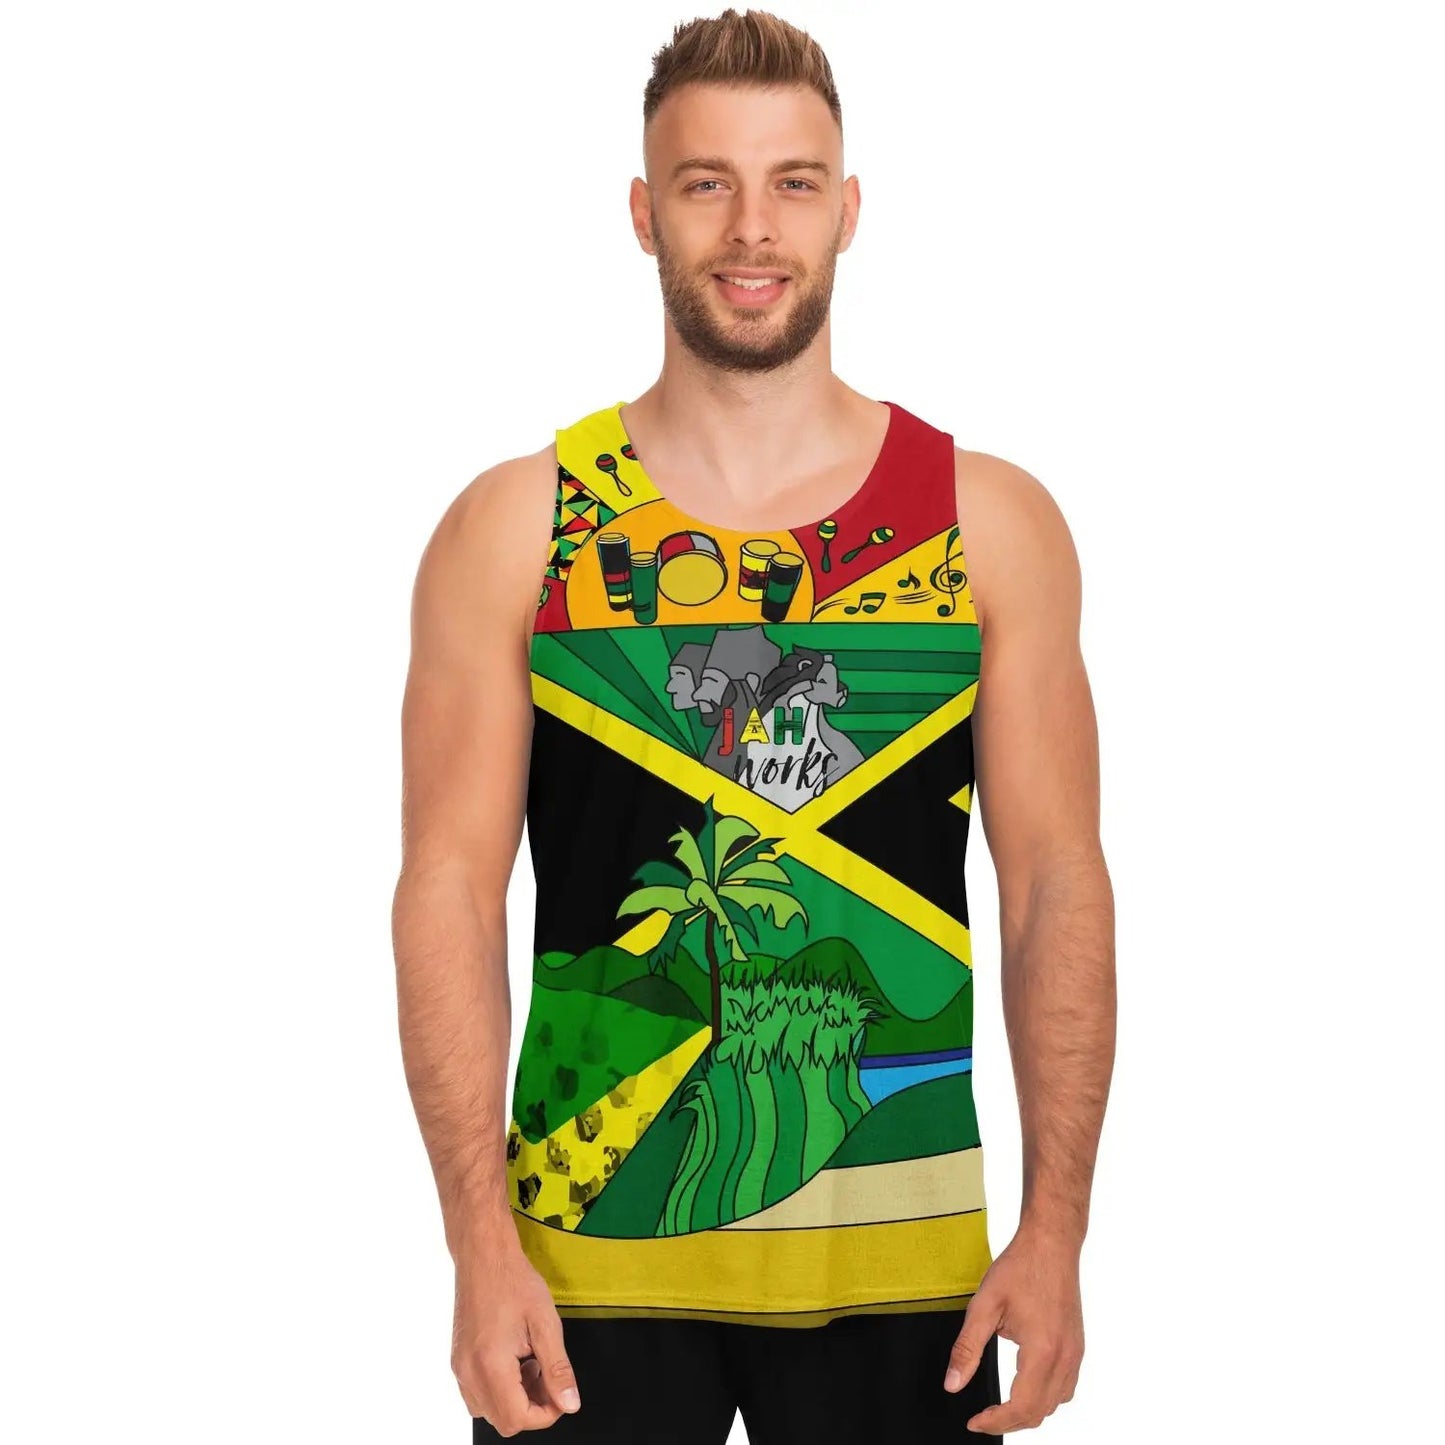 Jah Works Give Back Colorful Tank Top